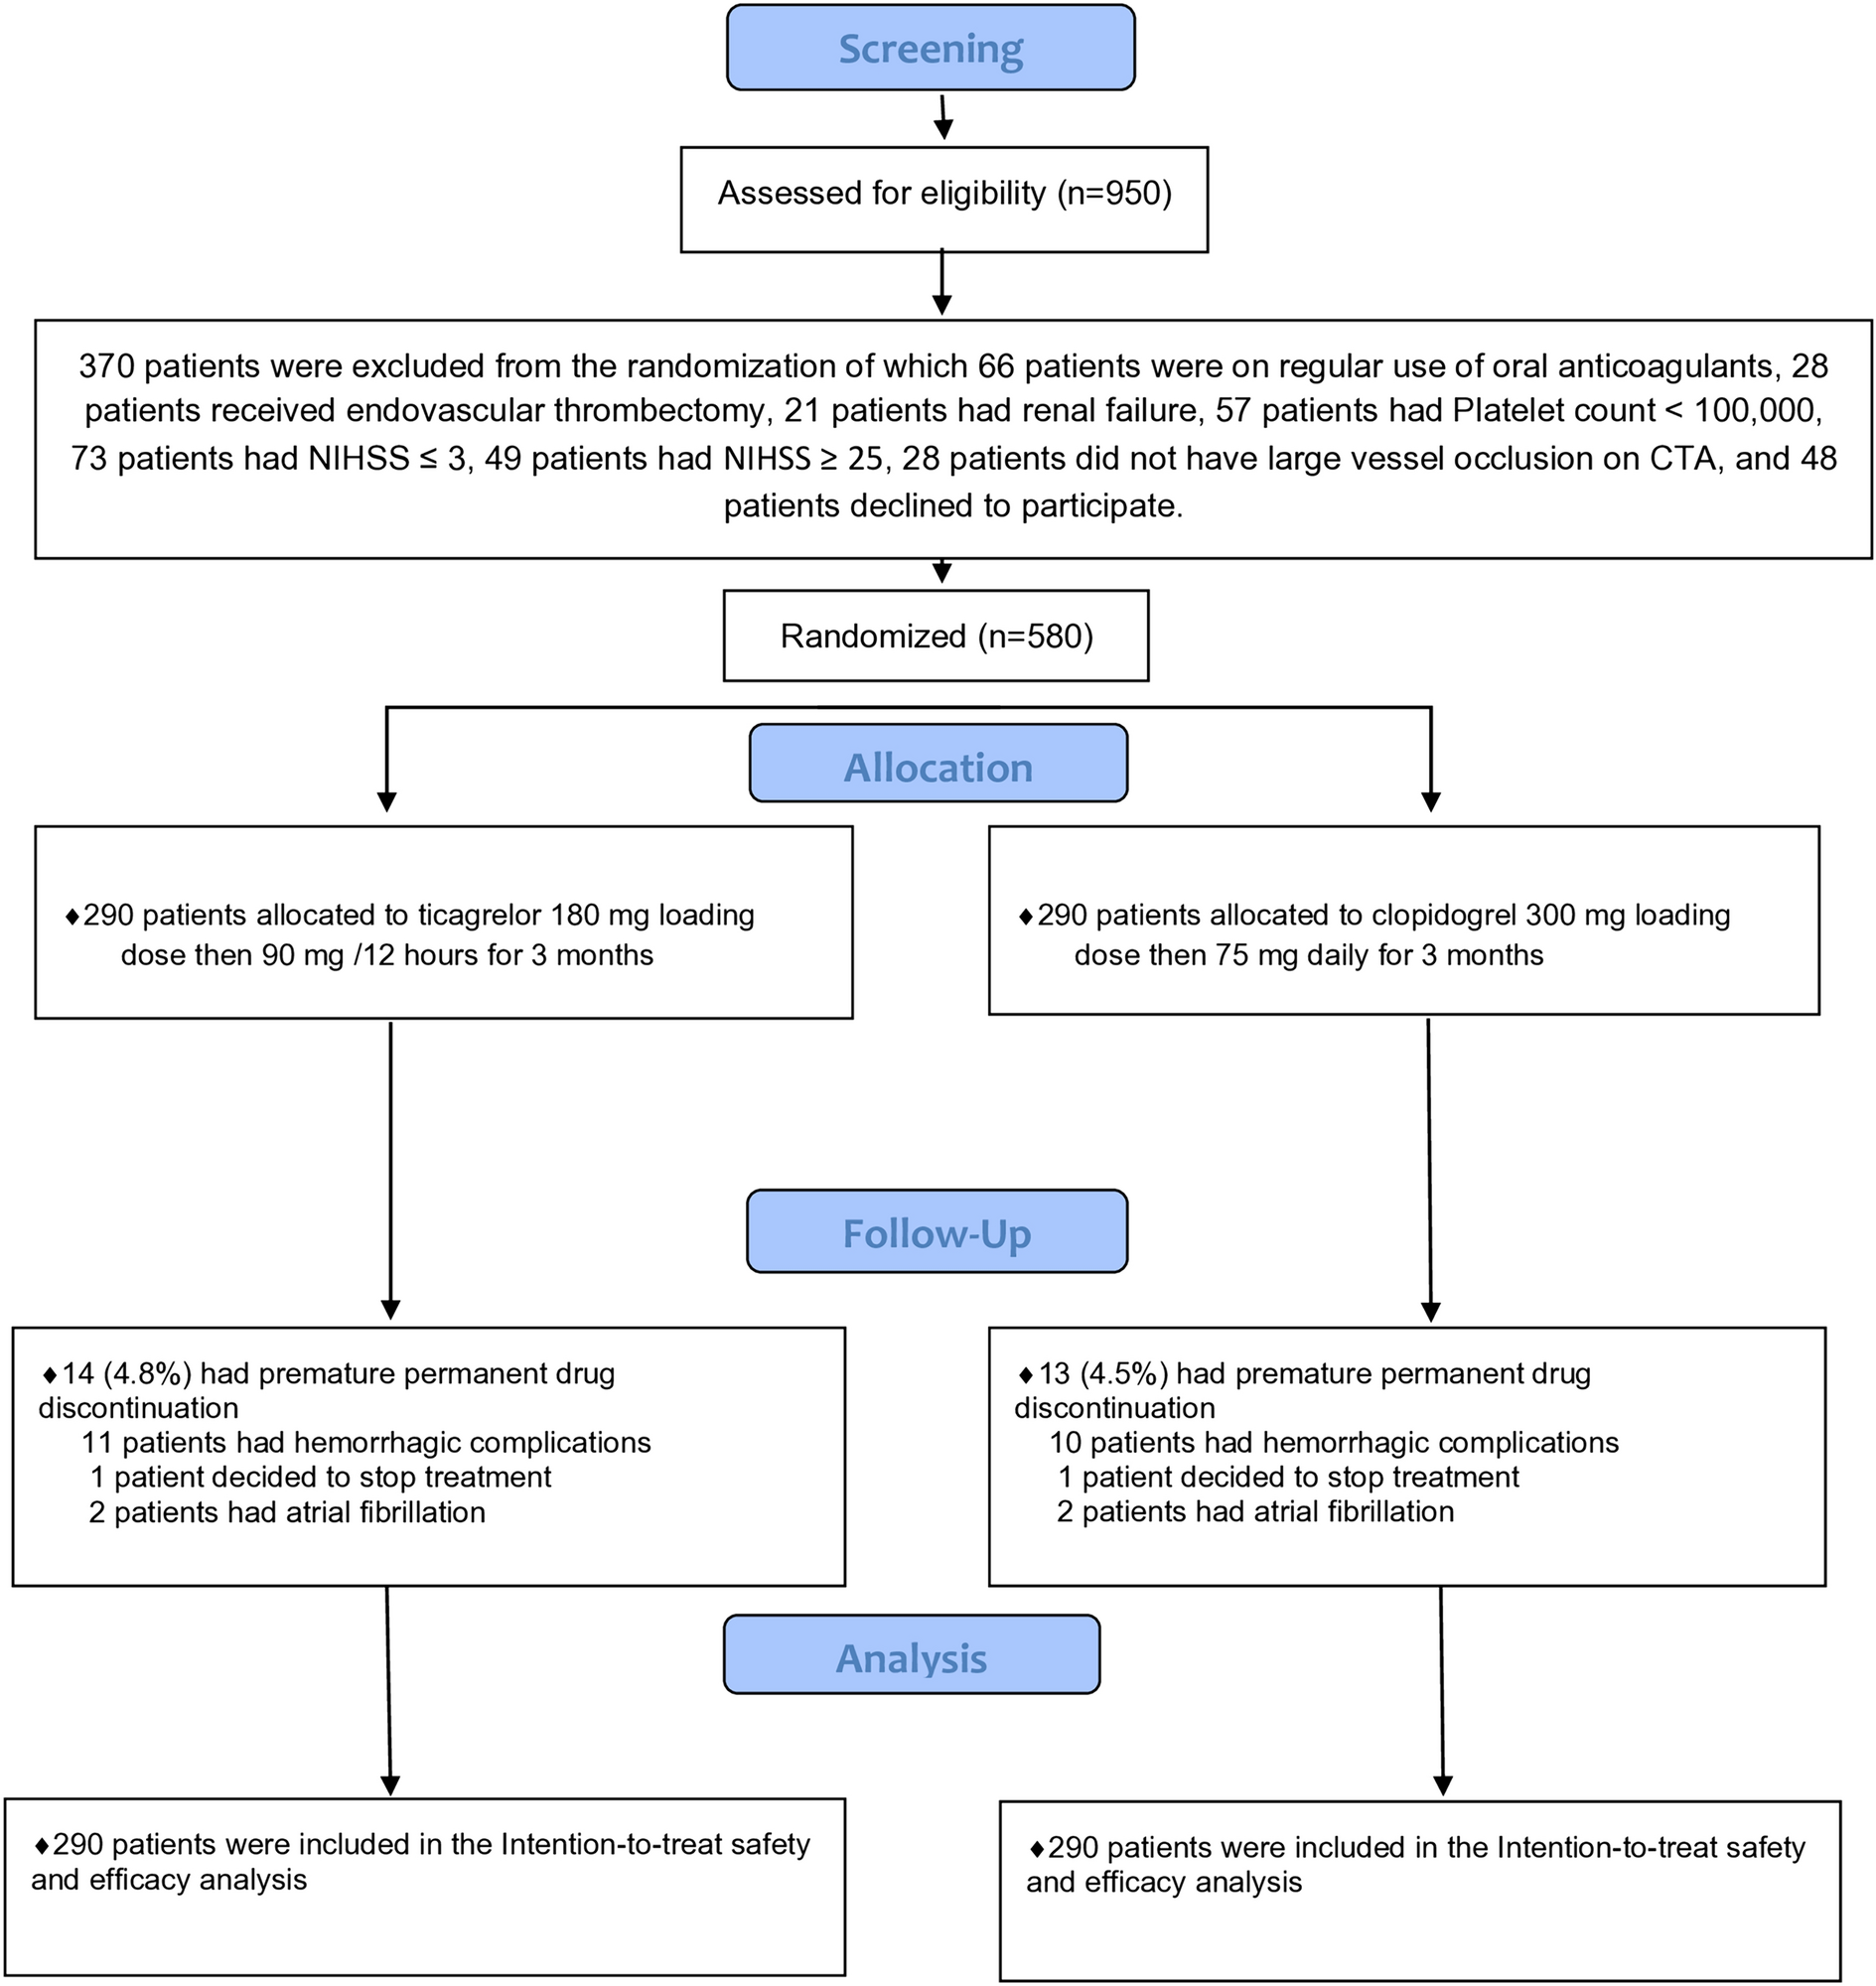 Ticagrelor Versus Clopidogrel in Acute Large-Vessel Ischemic Stroke: A Randomized Controlled Single-Blinded Trial